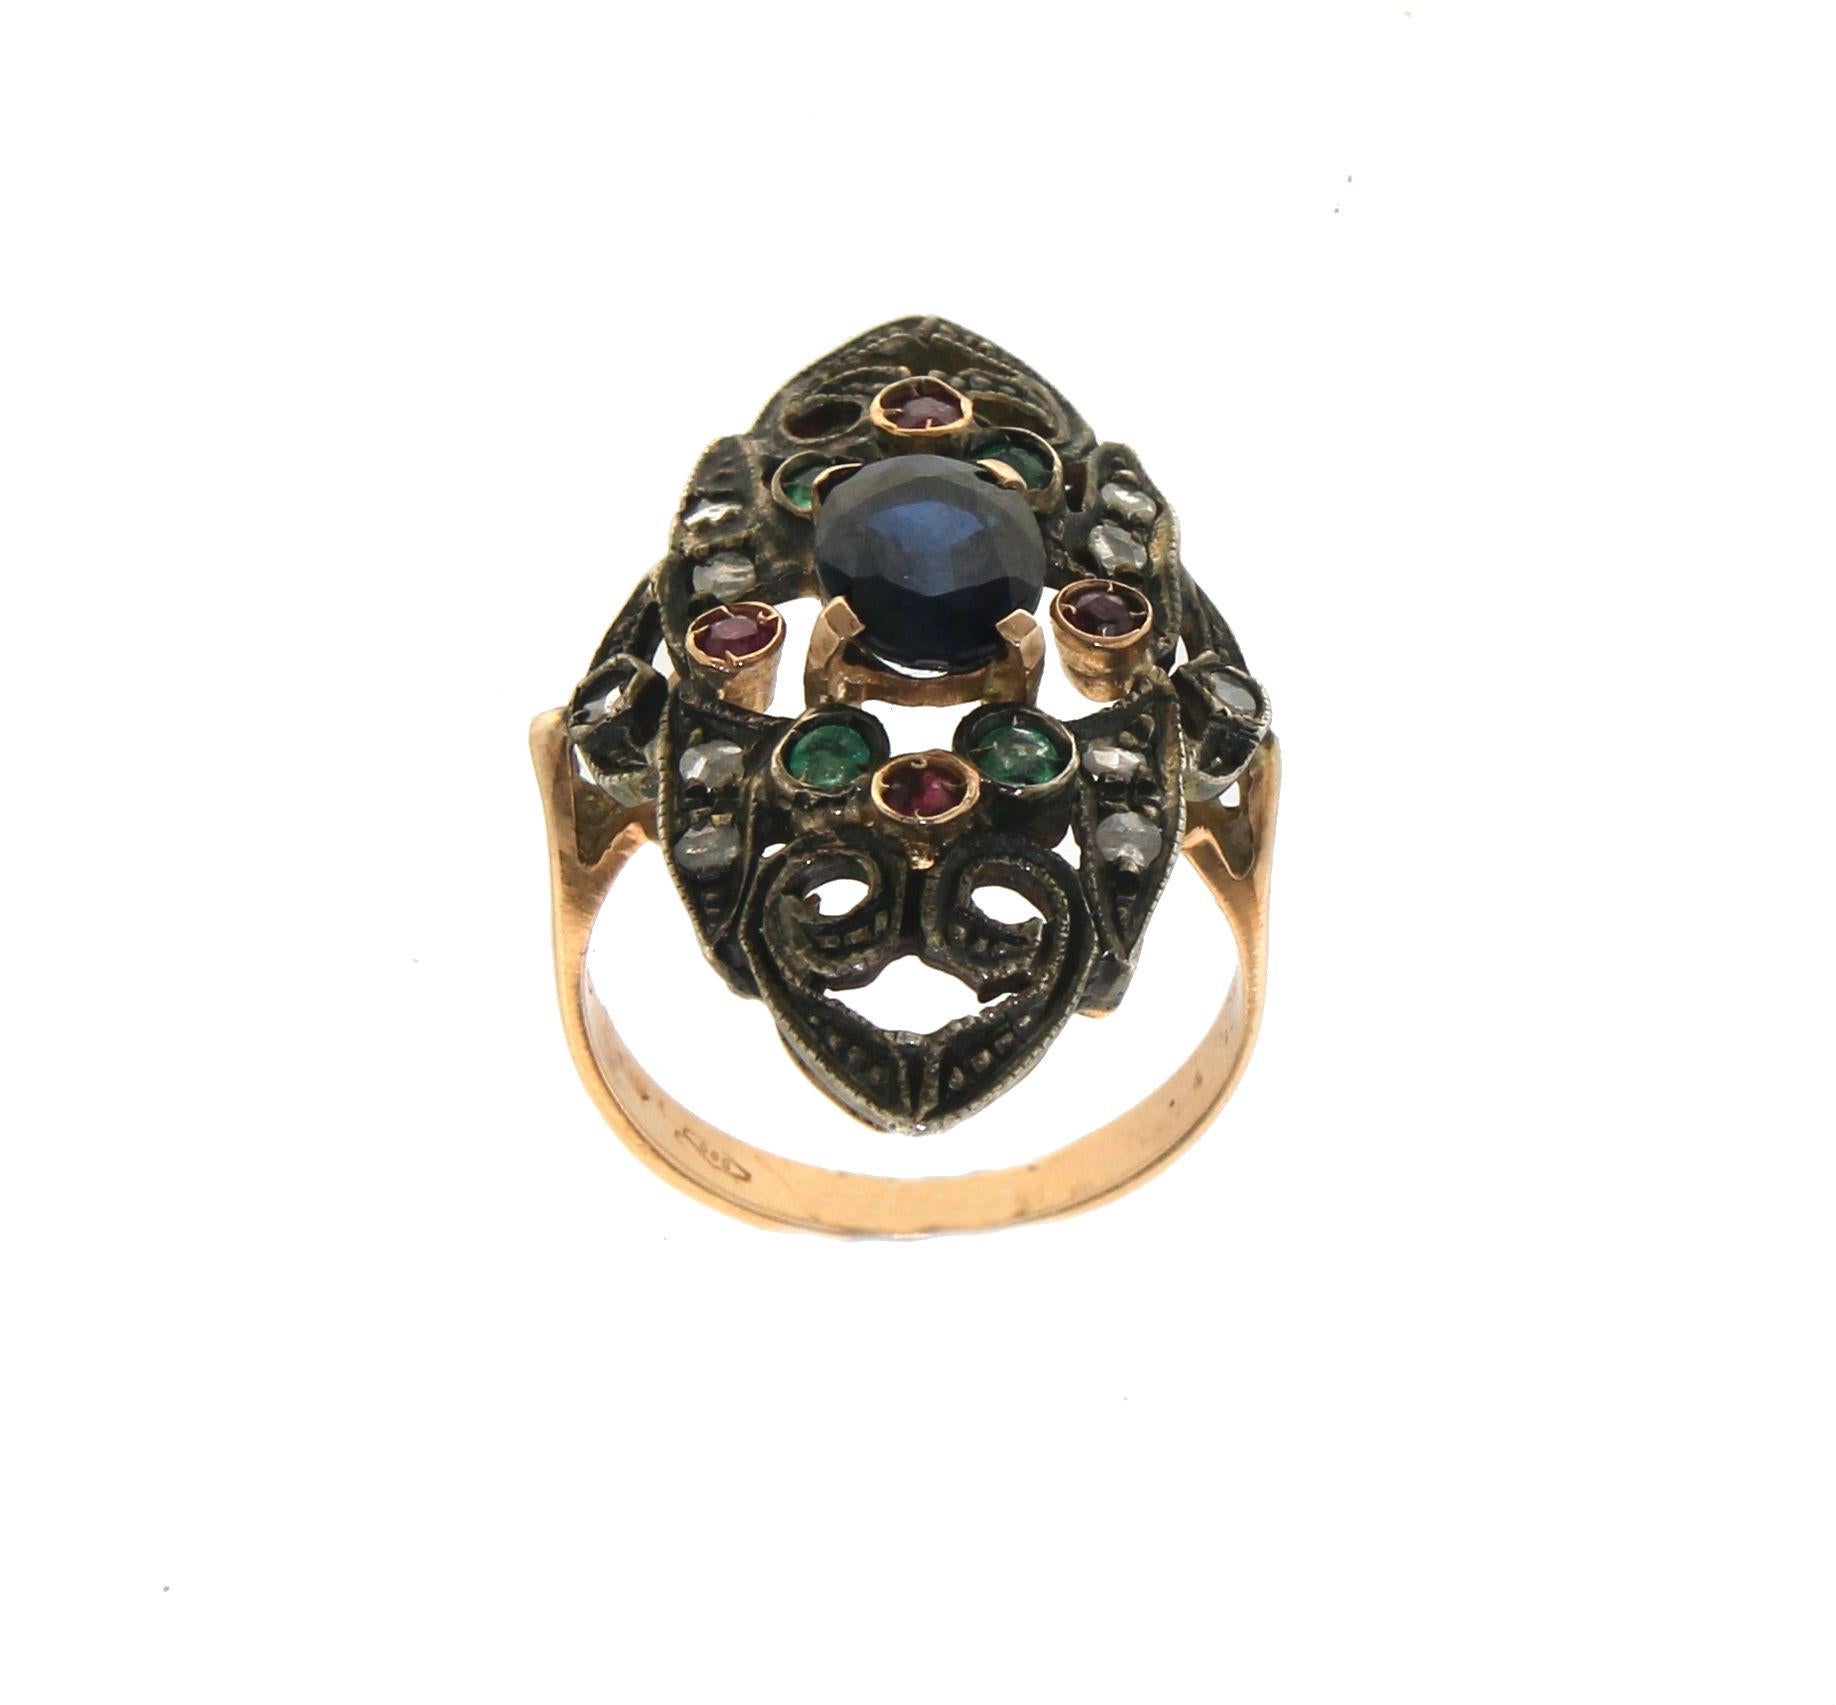 14 karat yellow gold and 800 thousandths silver cocktail ring. Handmade by artisans assembled with old diamonds, sapphires,ruby and emeralds.

Ring total weight 6.30 grams
Ring size 8.10 US 16.90 Ita
(all rings are can be resized)